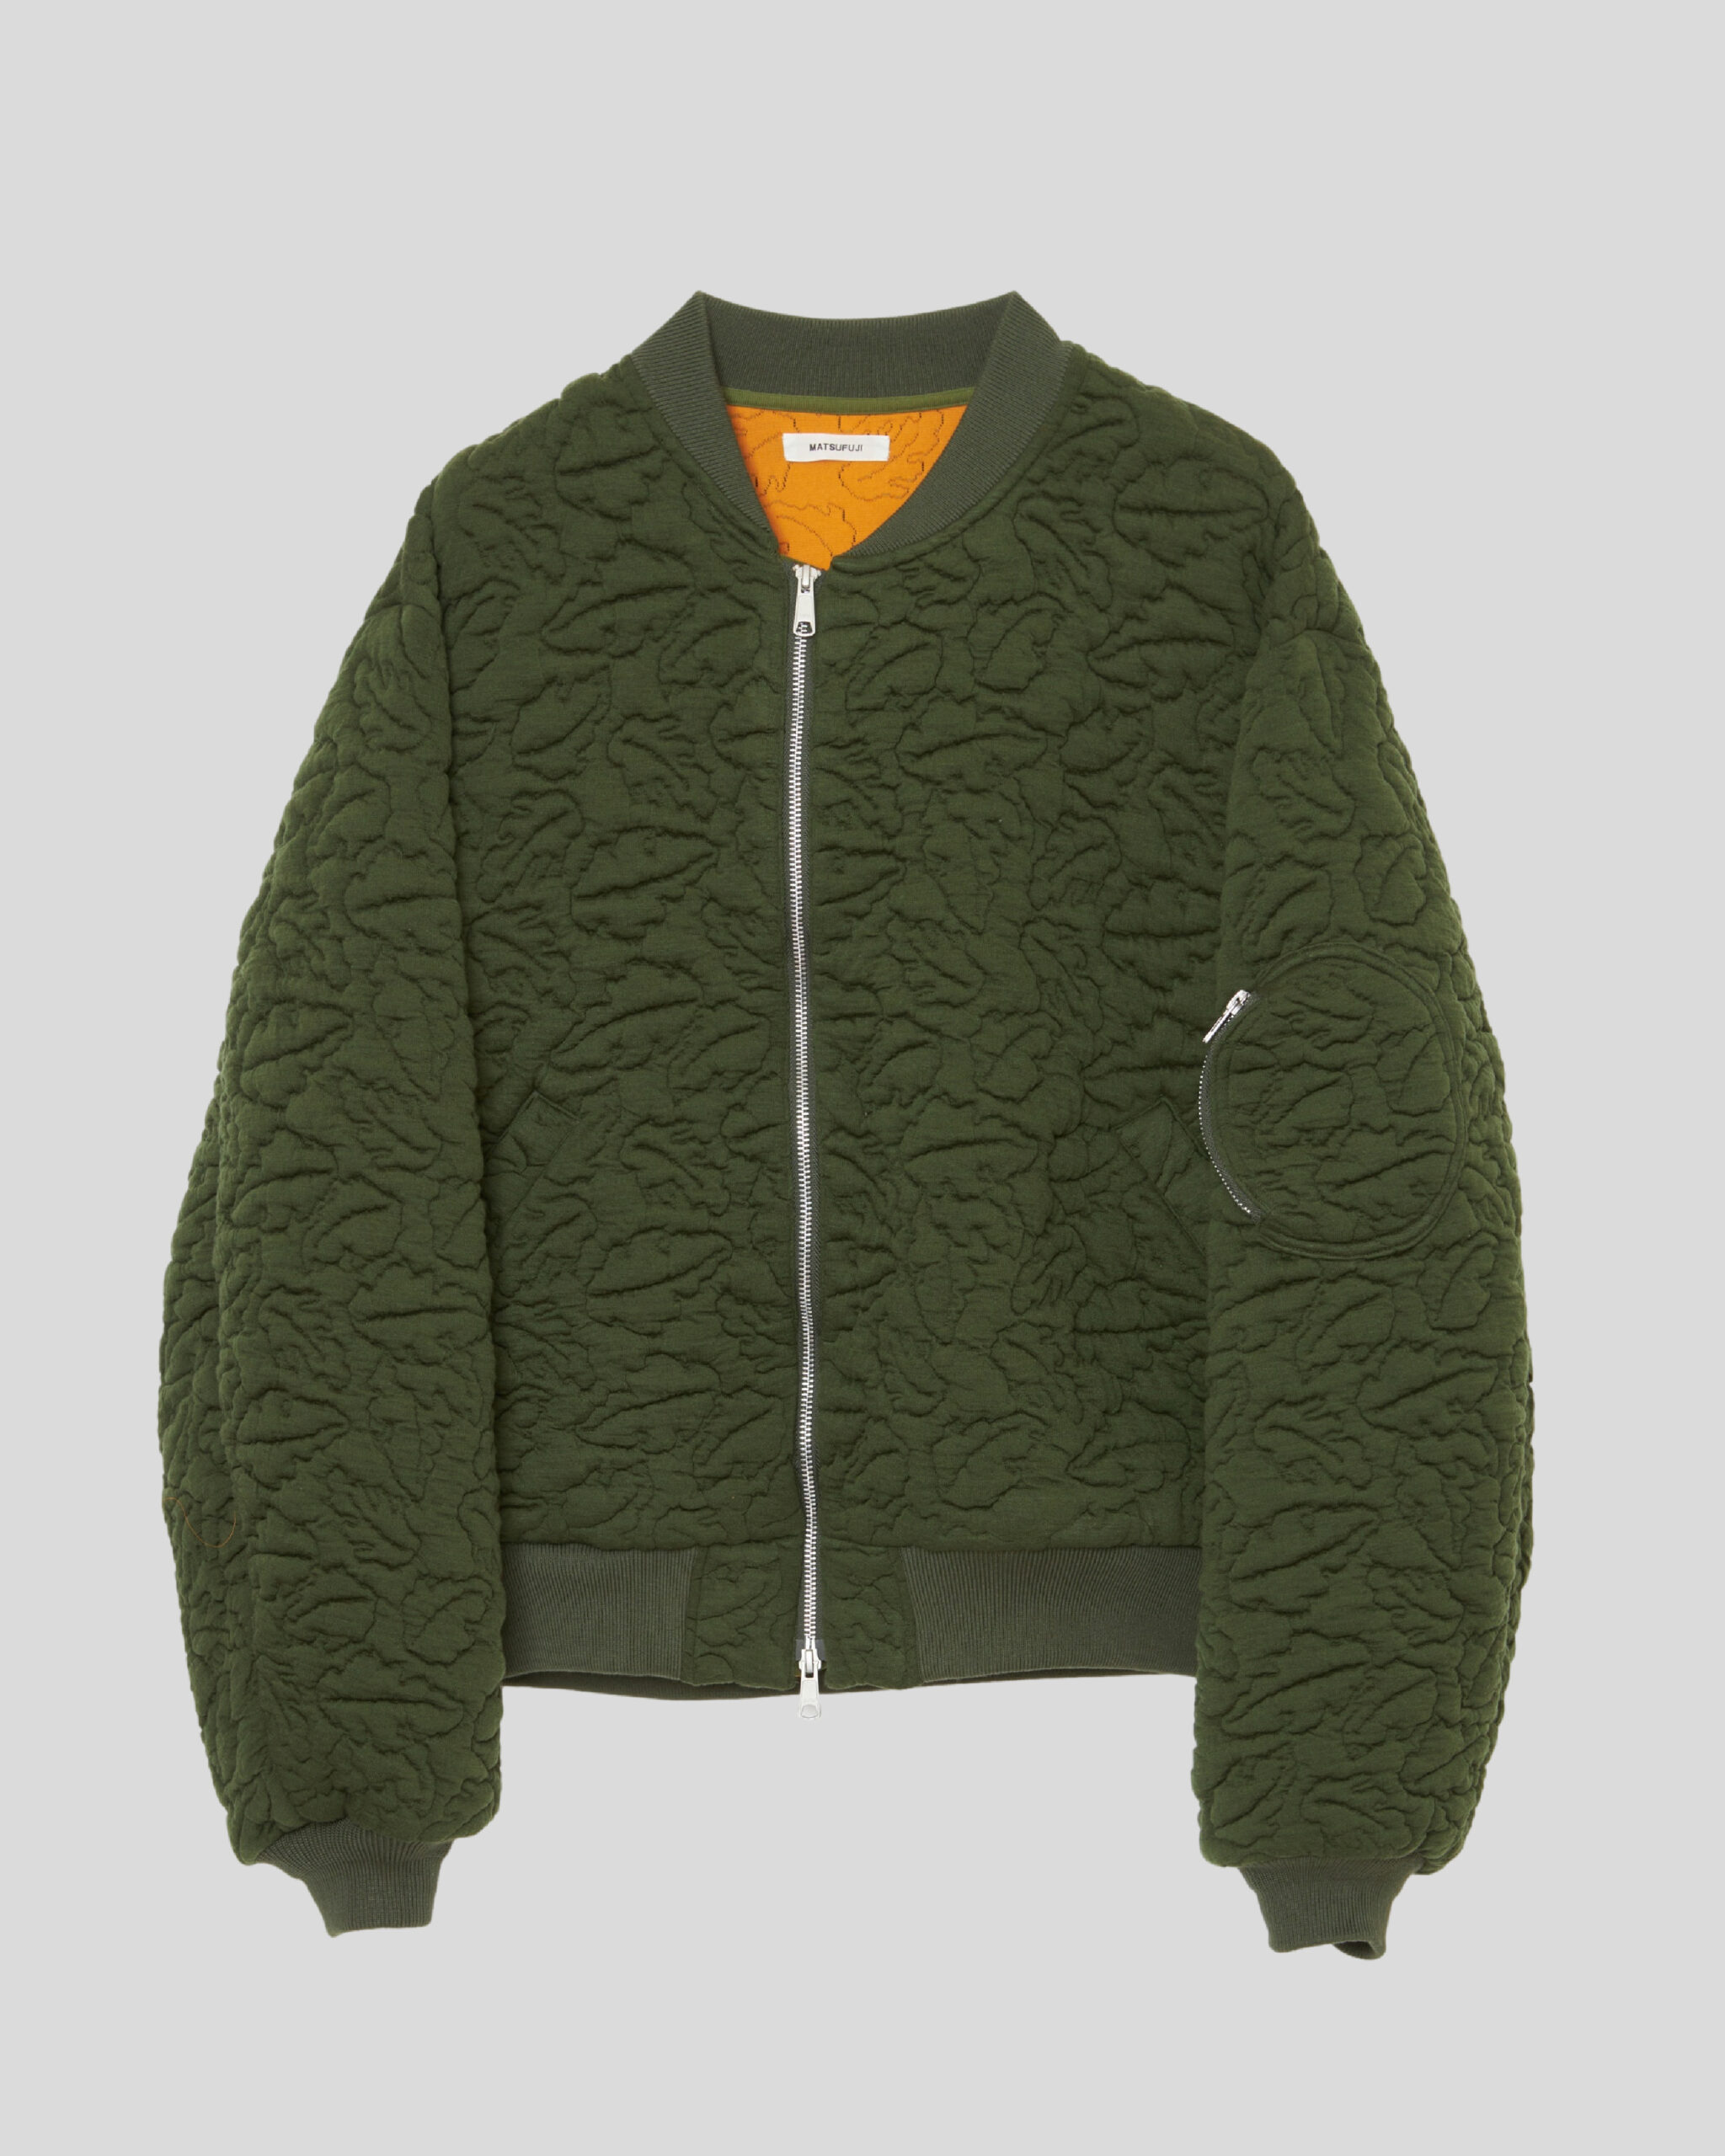 matsufuji LEAVES QUILTED JACQUARD JACKETTHE